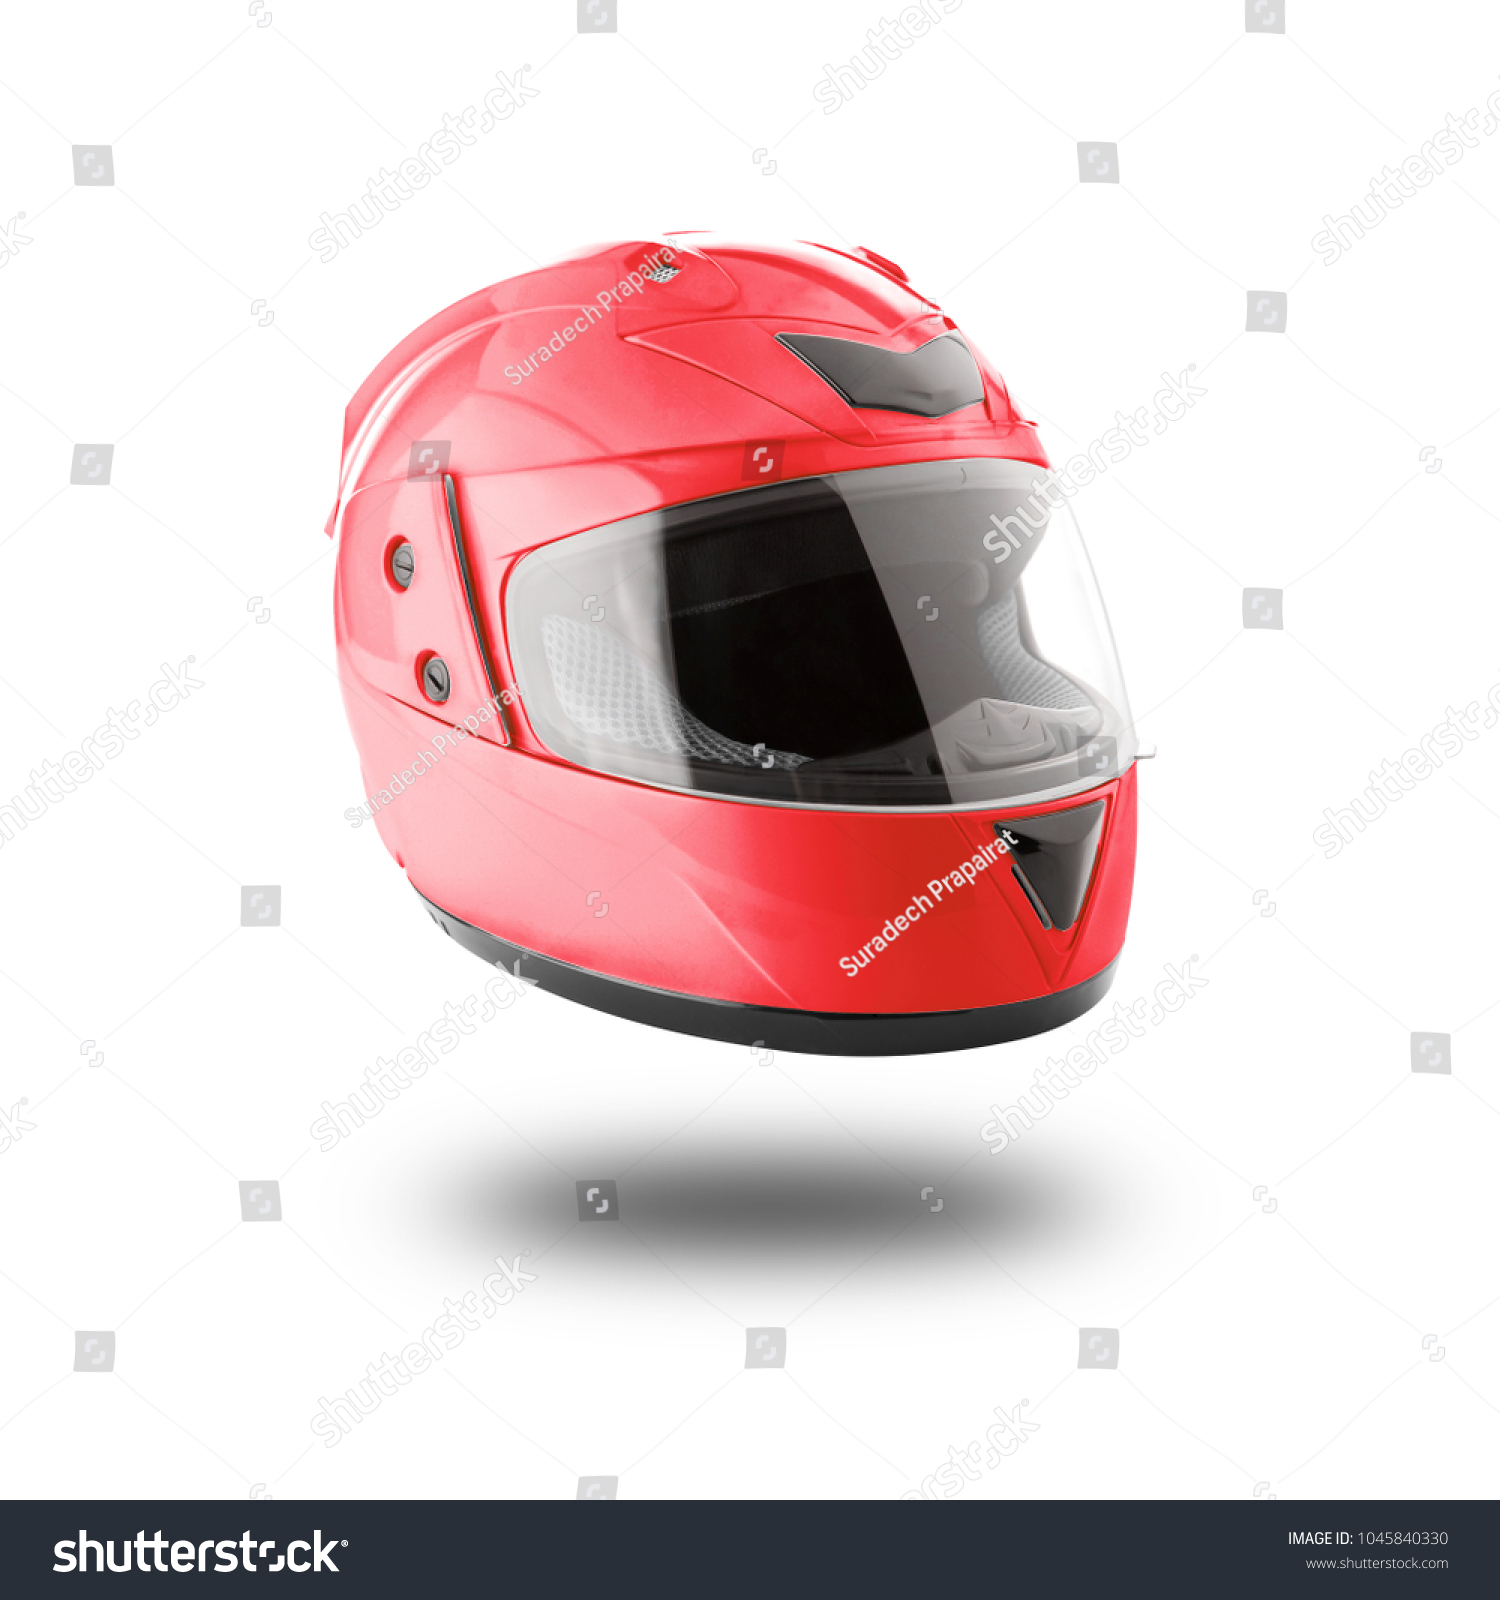 Motorcycle helmet over isolate on white background with clipping path

 #1045840330